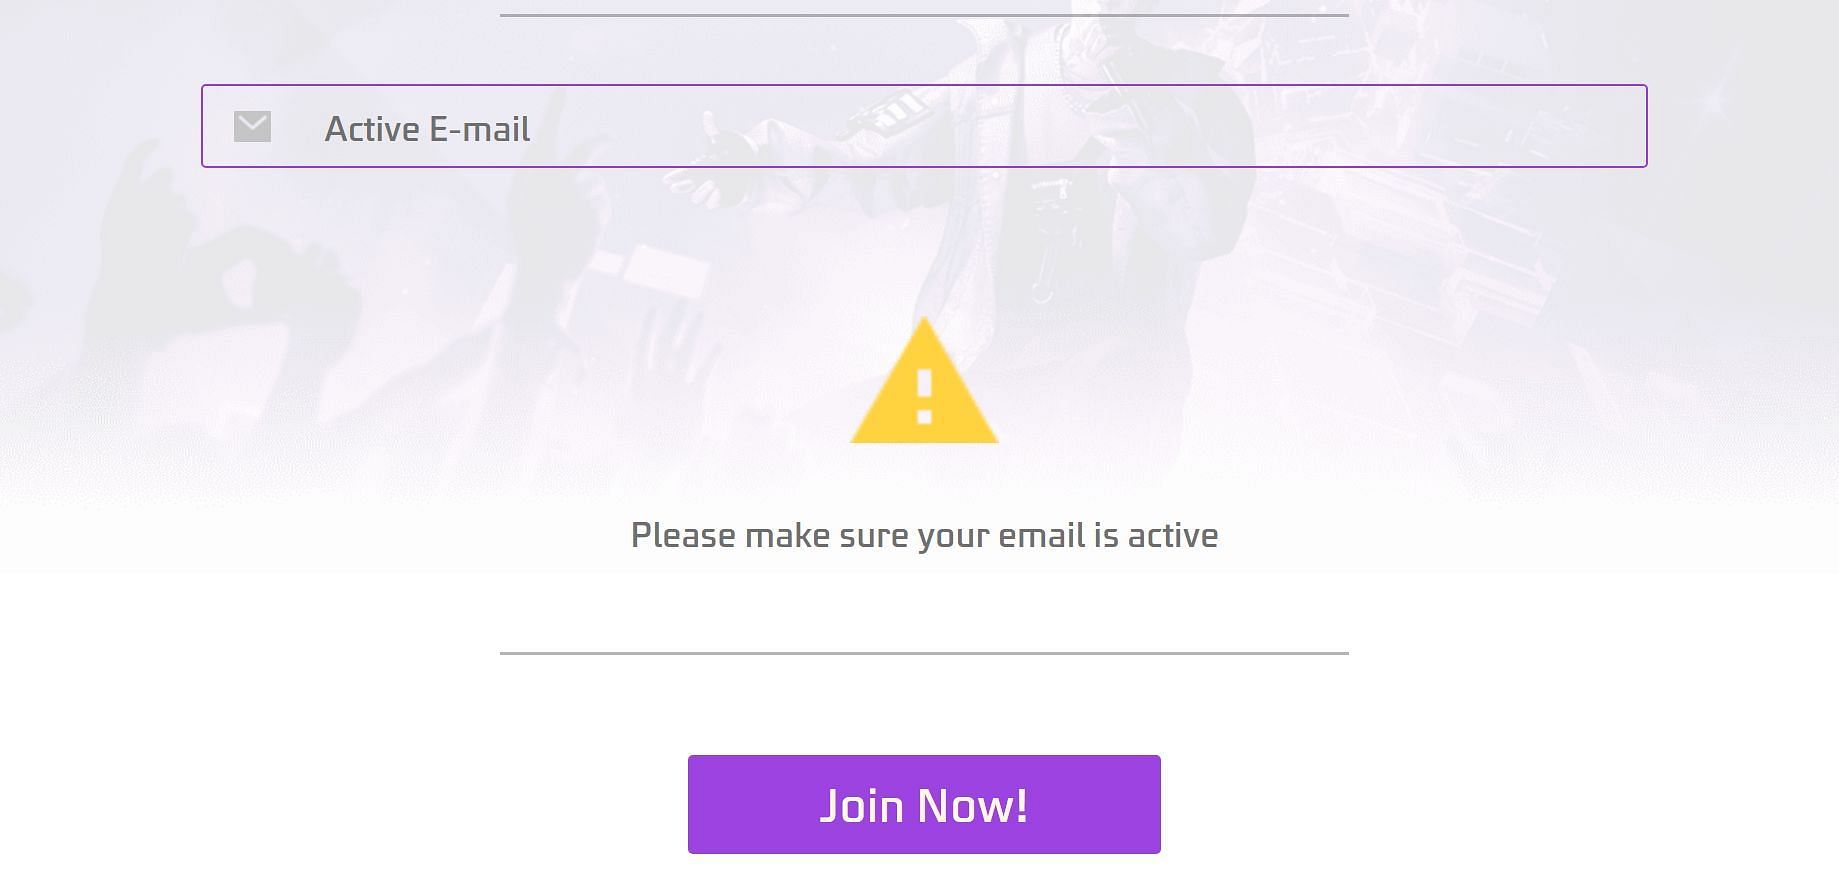 Users must press &quot;Join Now!&quot; once they have filled in their active e-mail (Image via Garena)